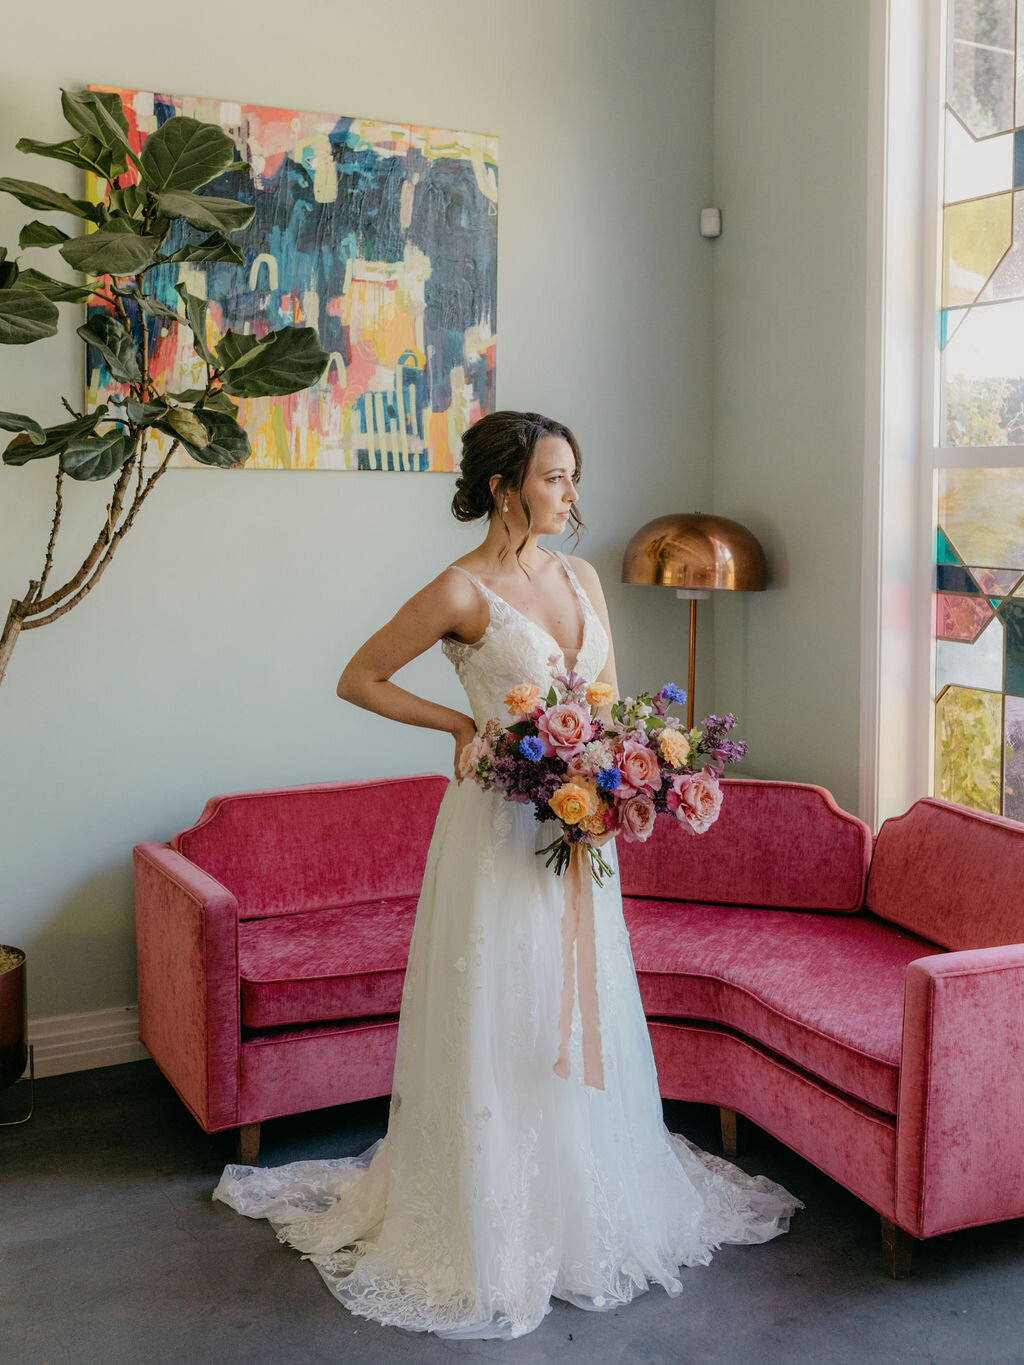 Bride holding a colorful bouquet in front of a pink couch